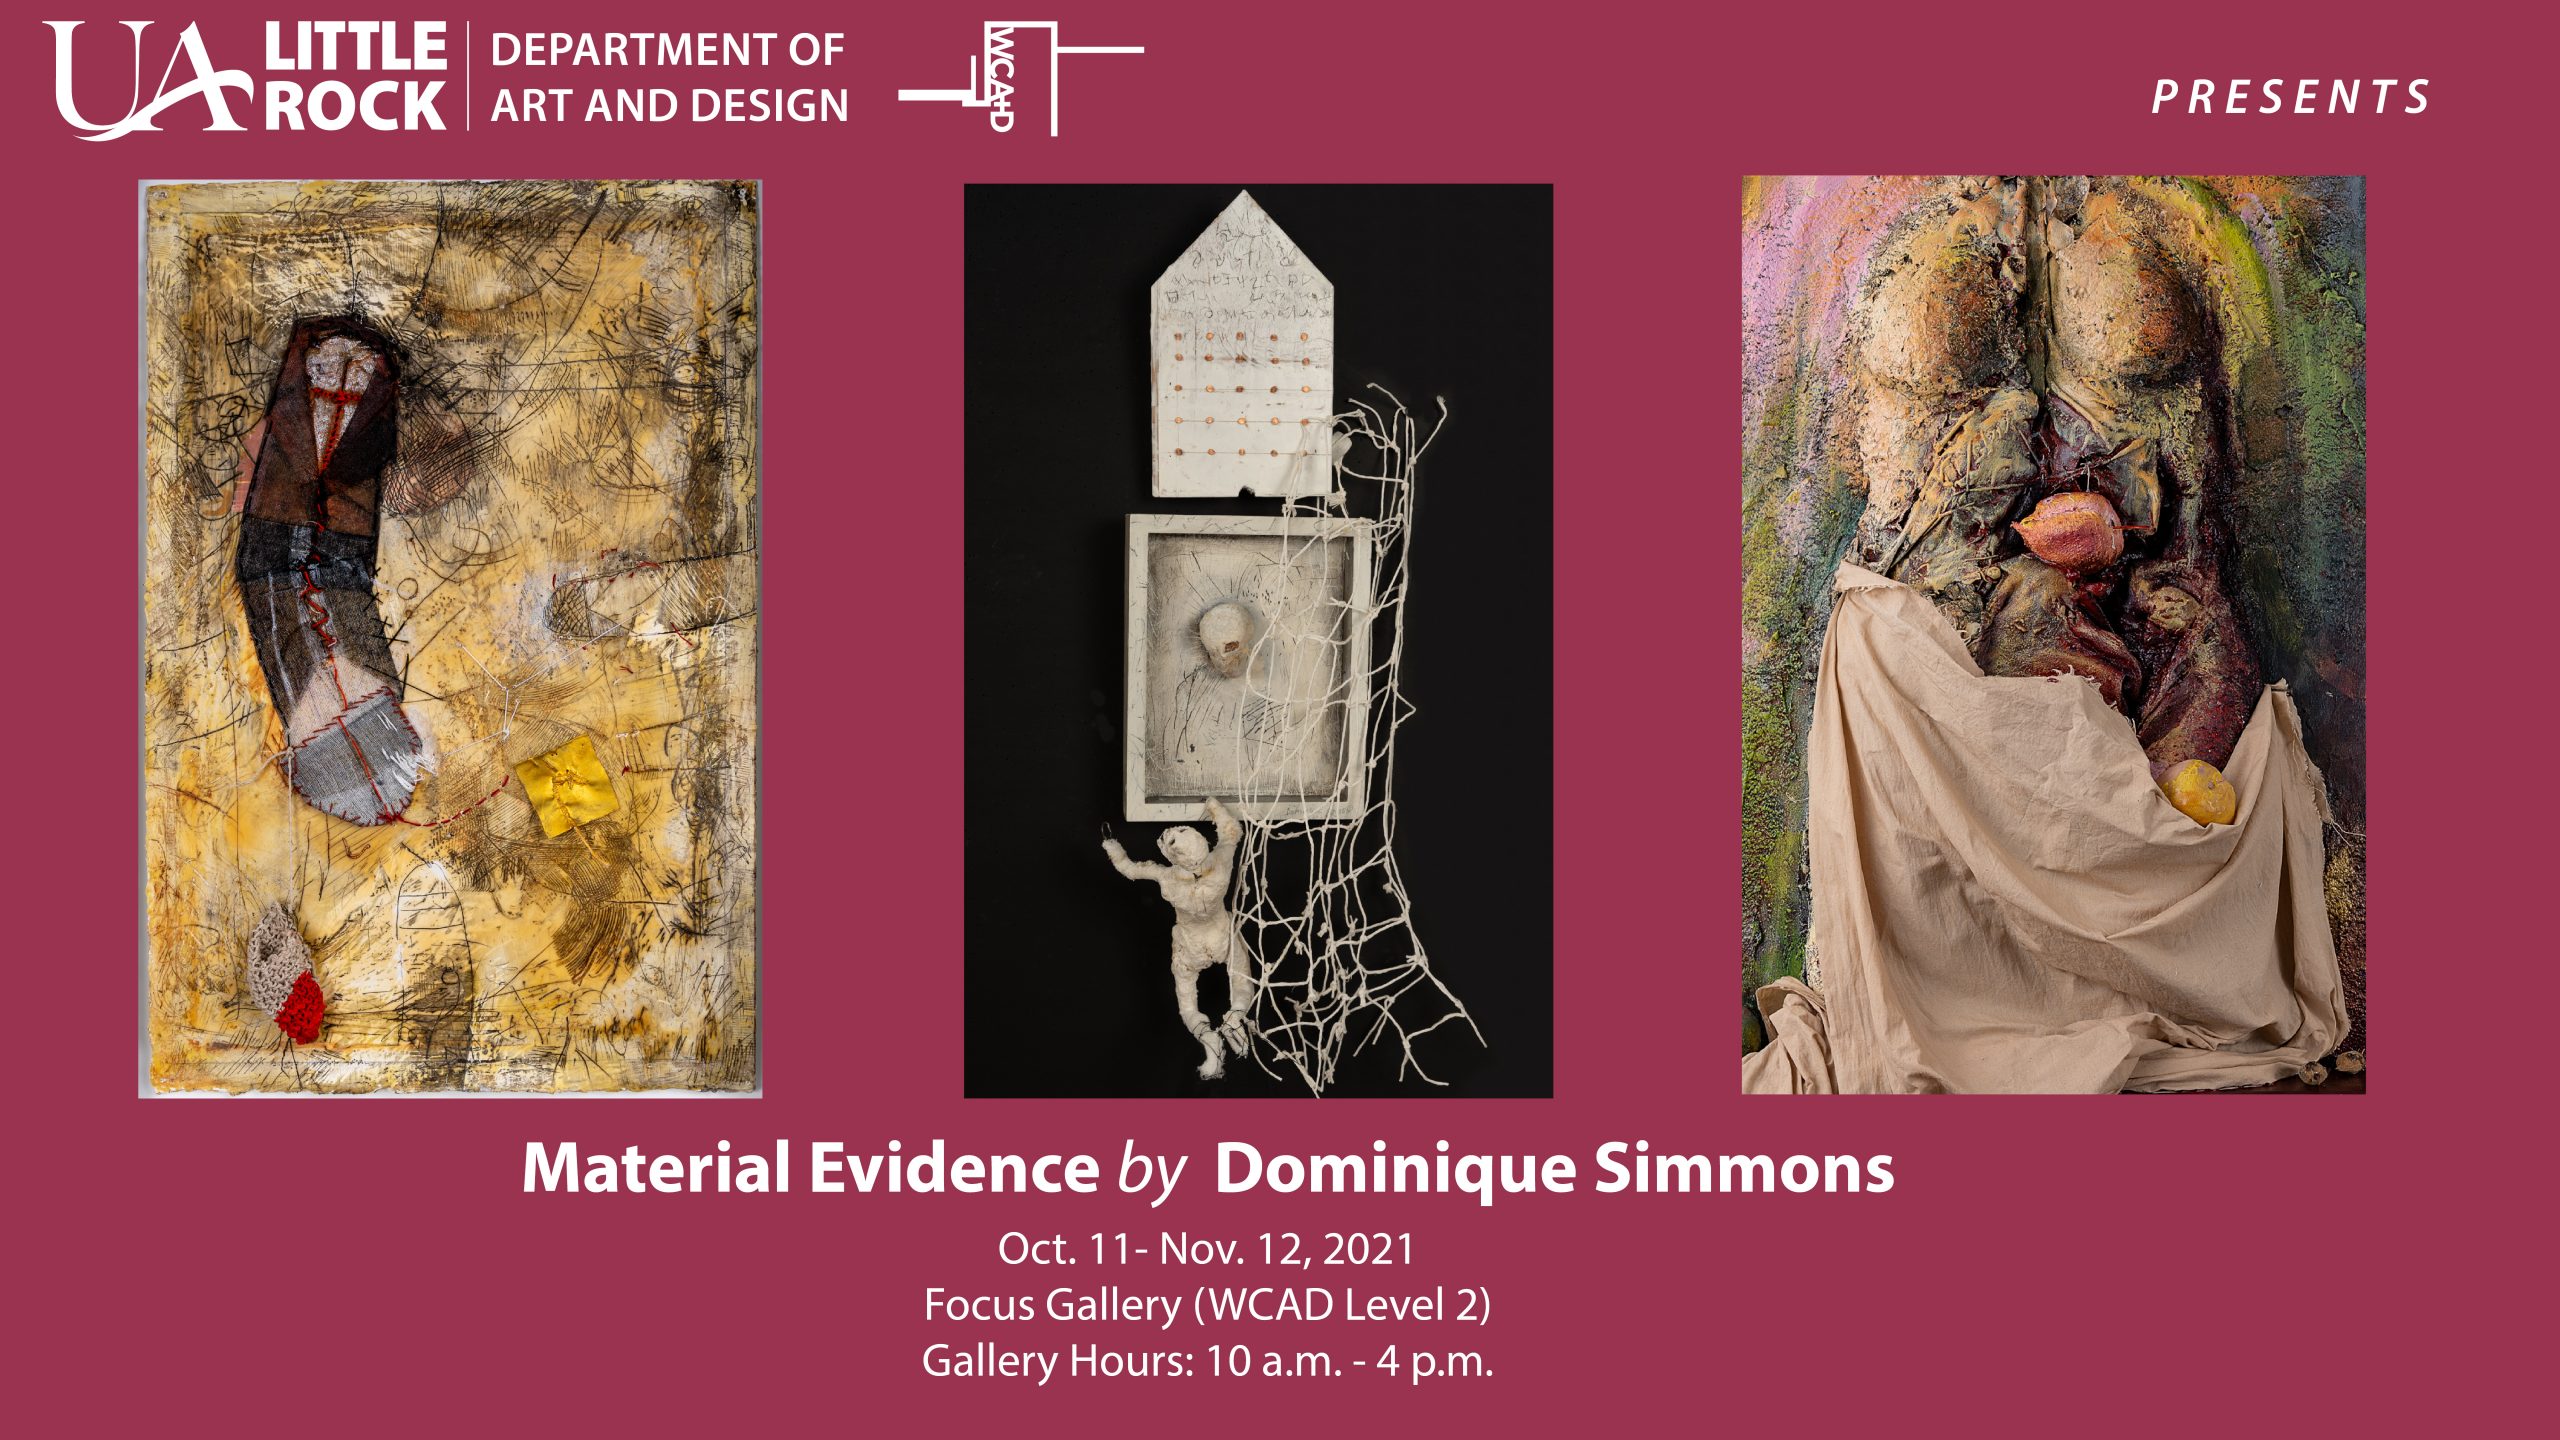 The UA Little Rock Department of Art and Design presents "Material Evidence" by Dominique Simmons.